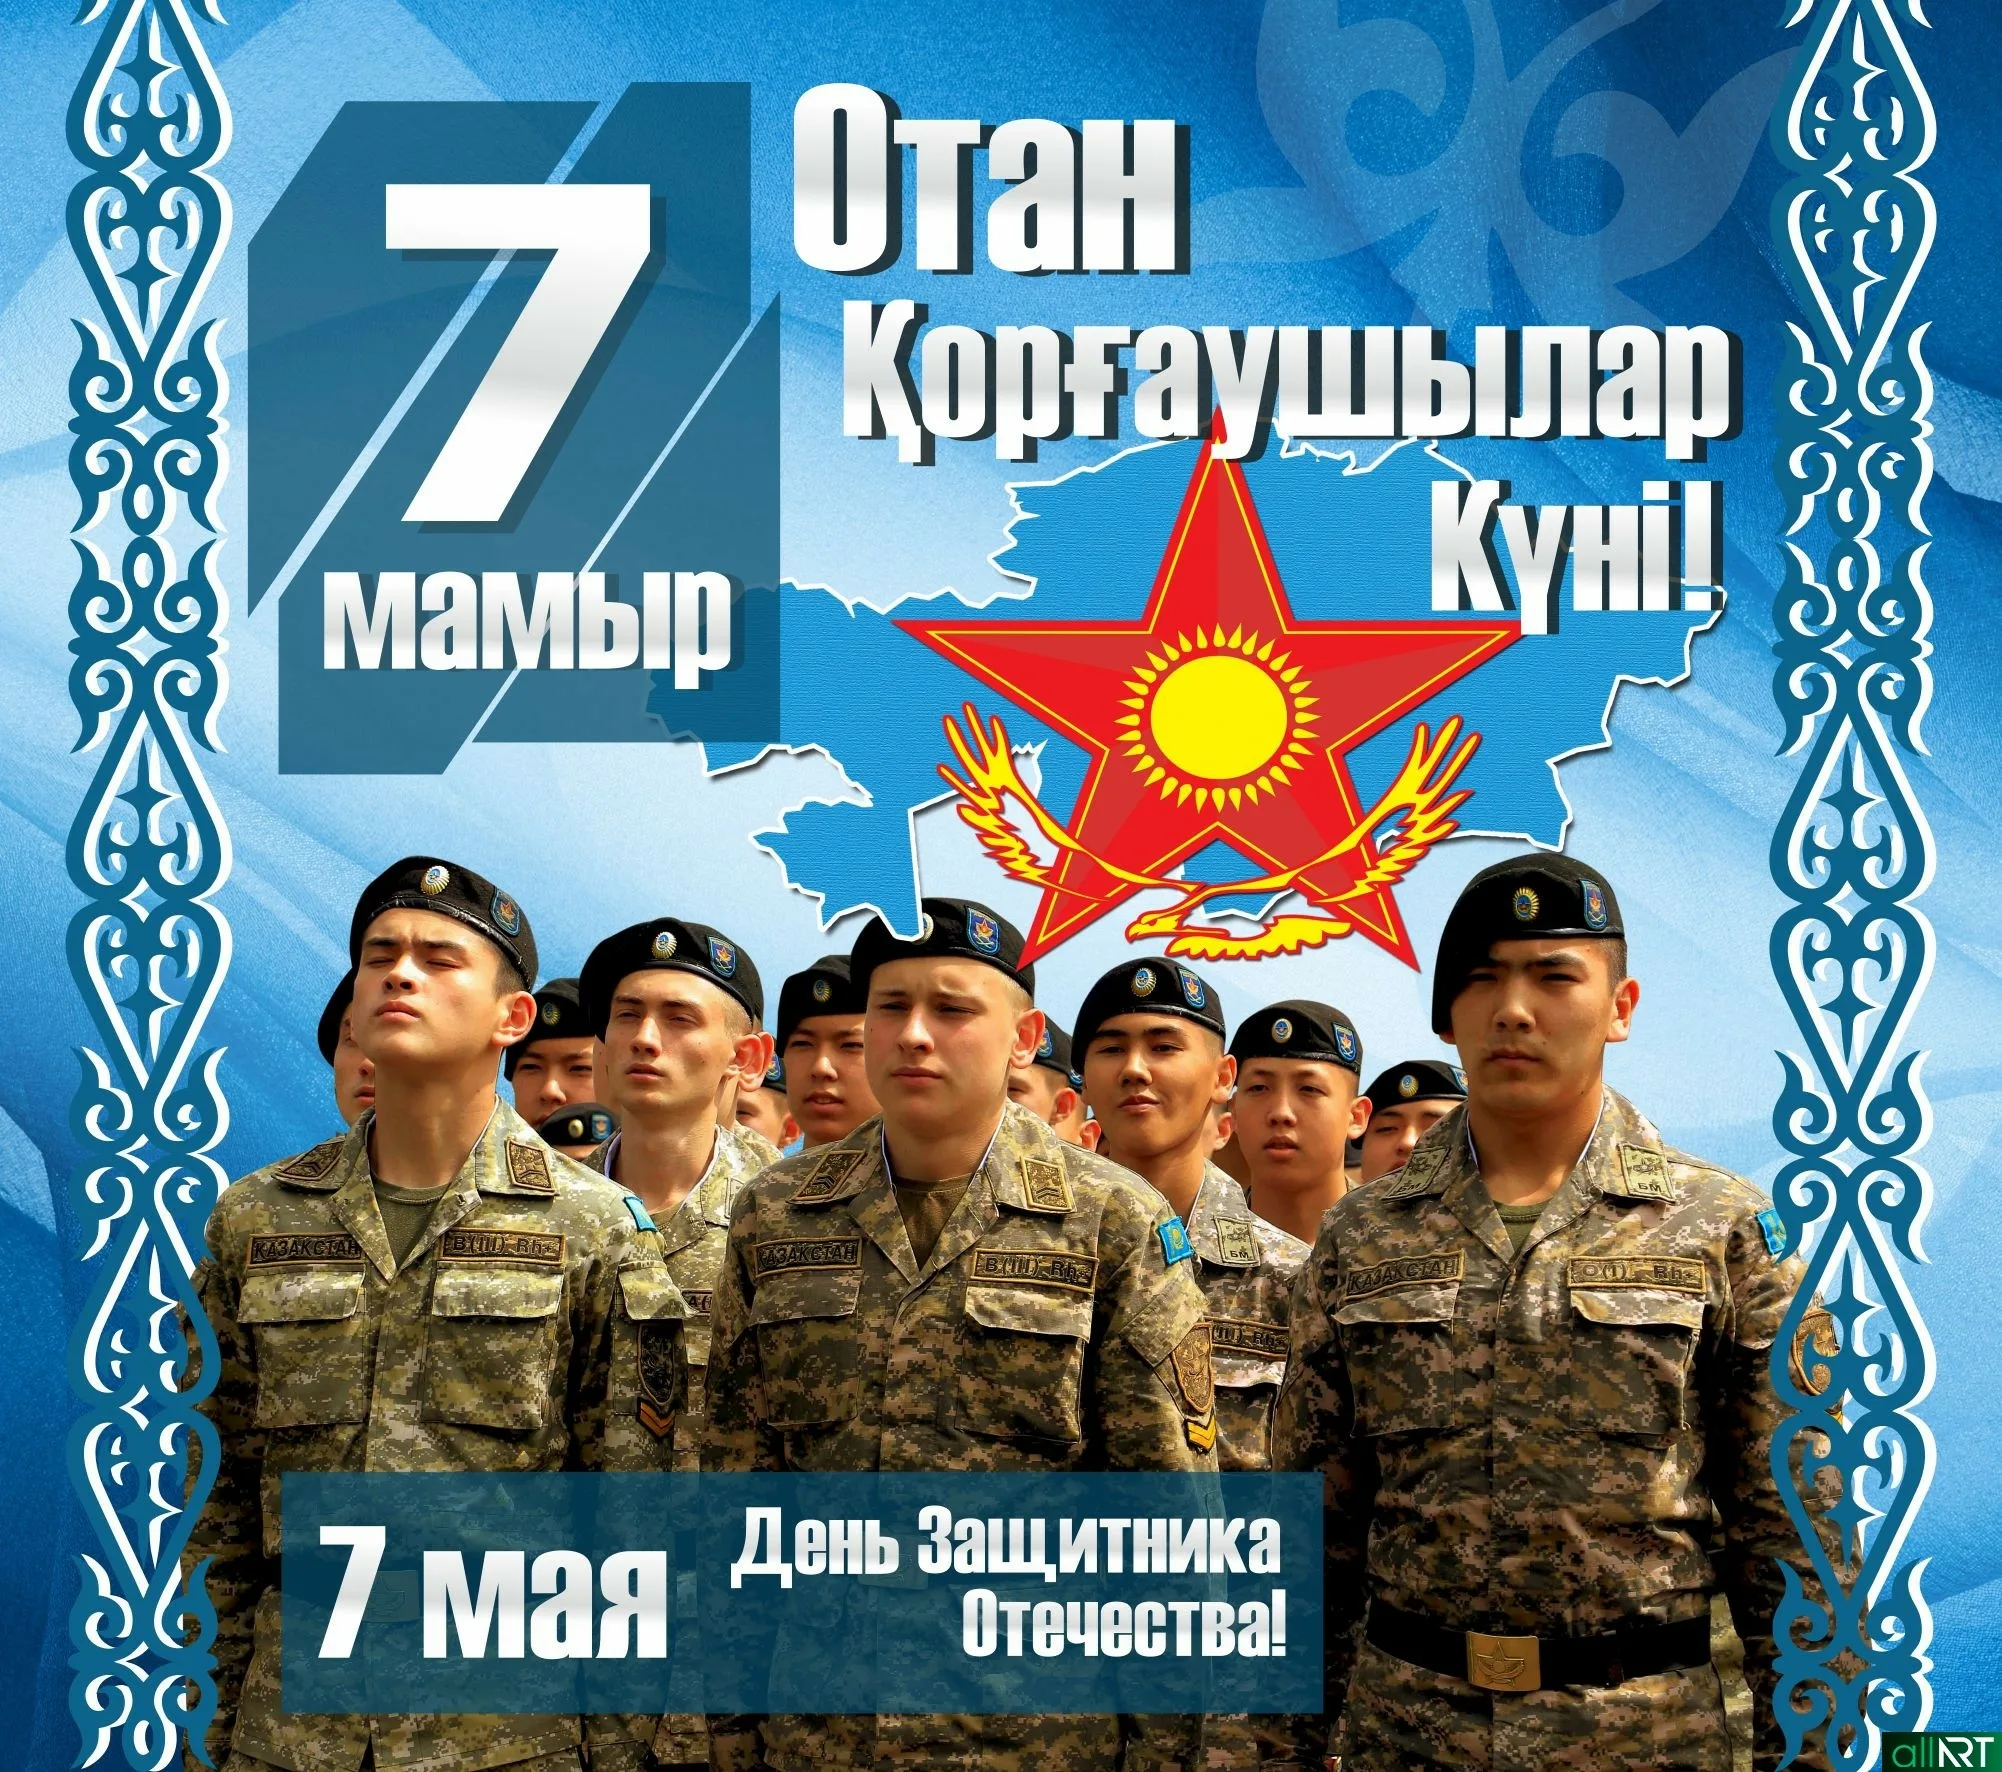 Фото Congratulations to dad on Defender of the Fatherland Day in Kazakhstan (from May 7) #3